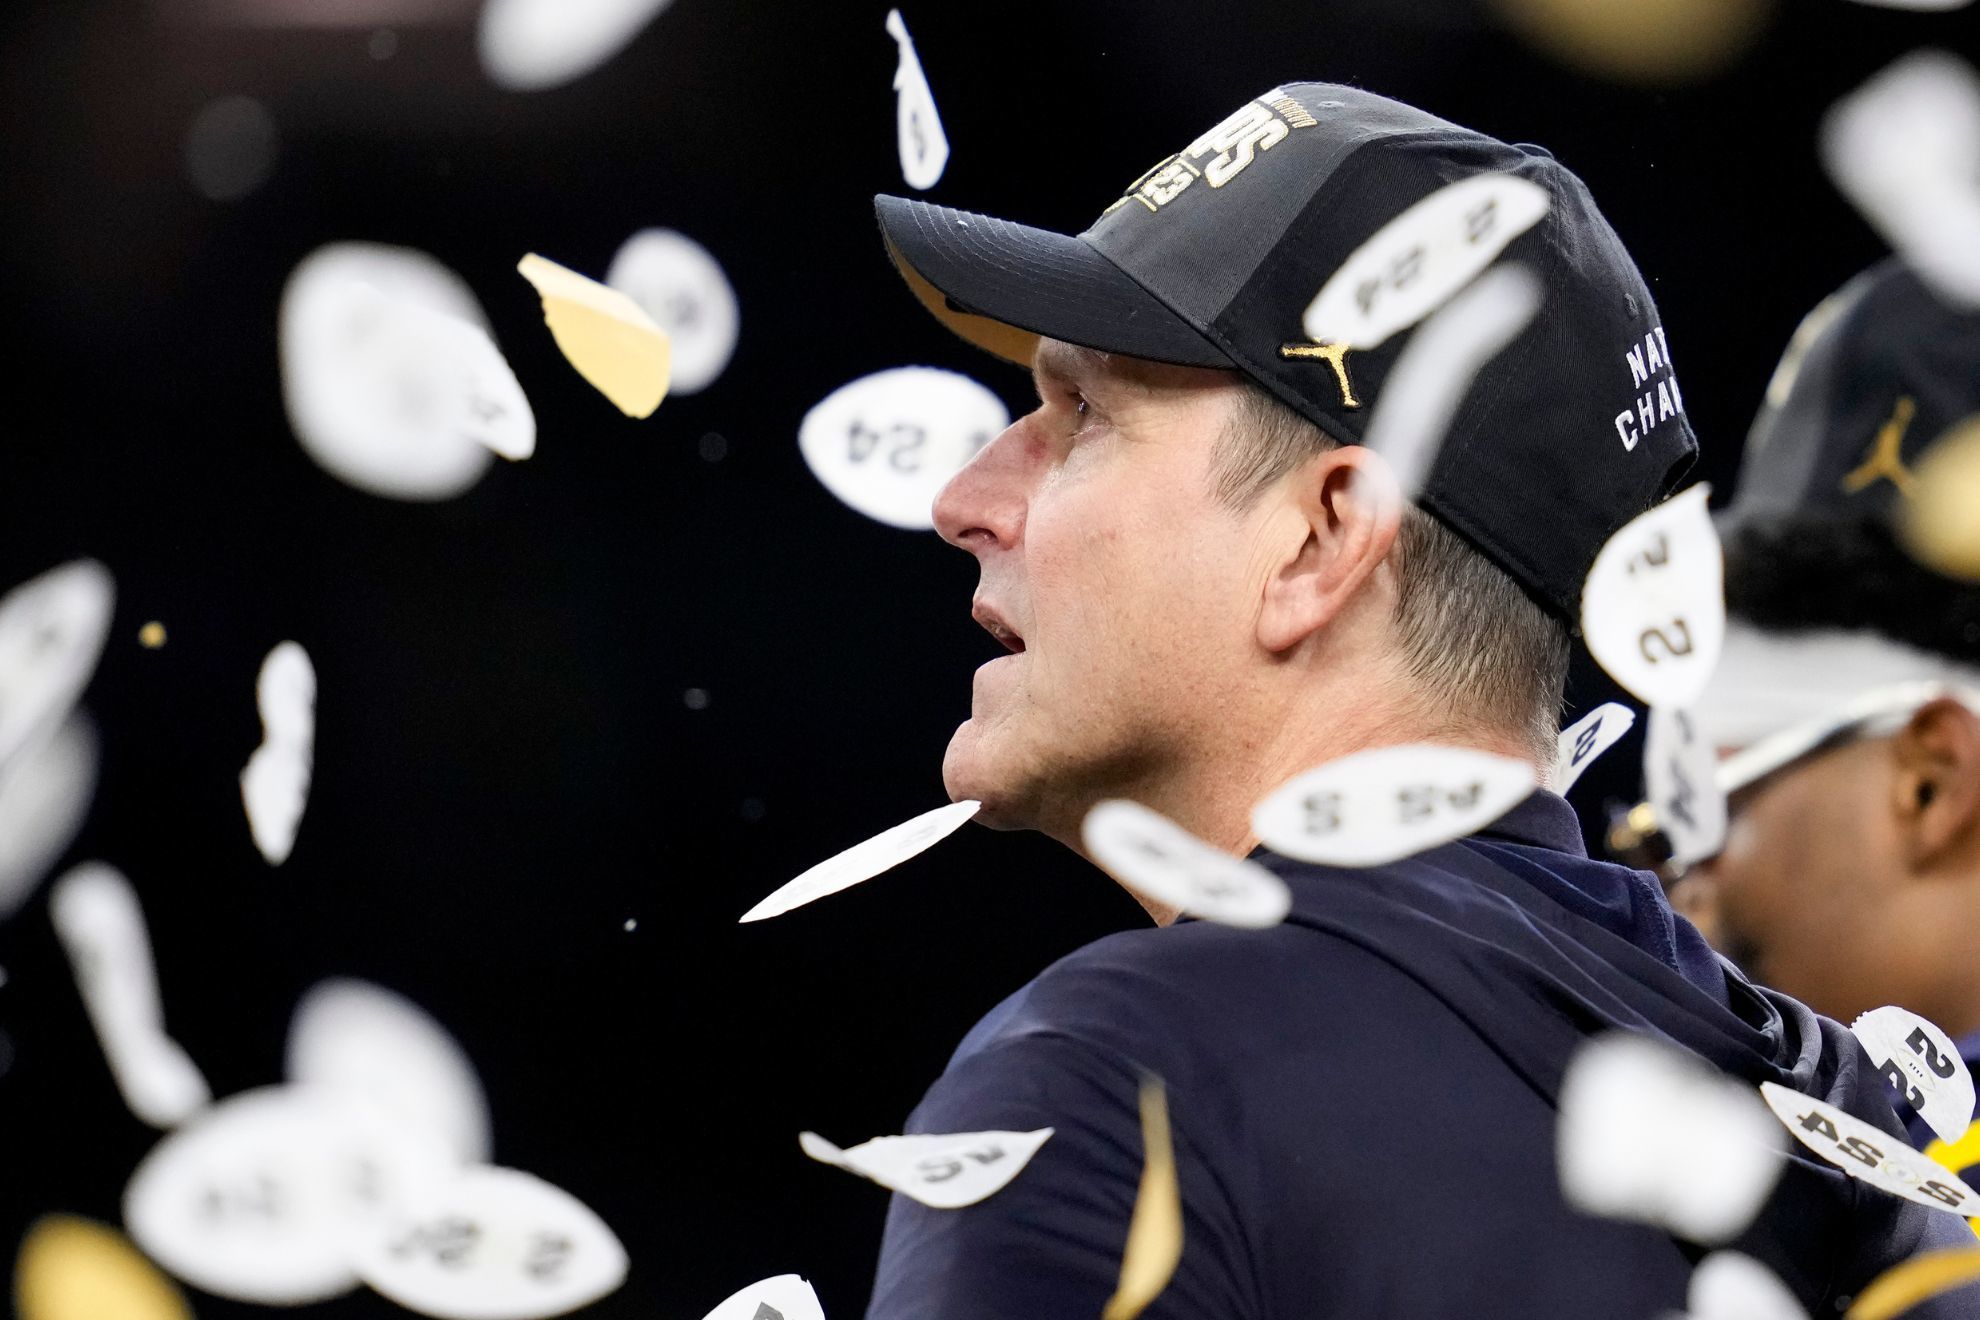 Jim Harbaugh begs for more time before discussing NFL future: which teams want him?